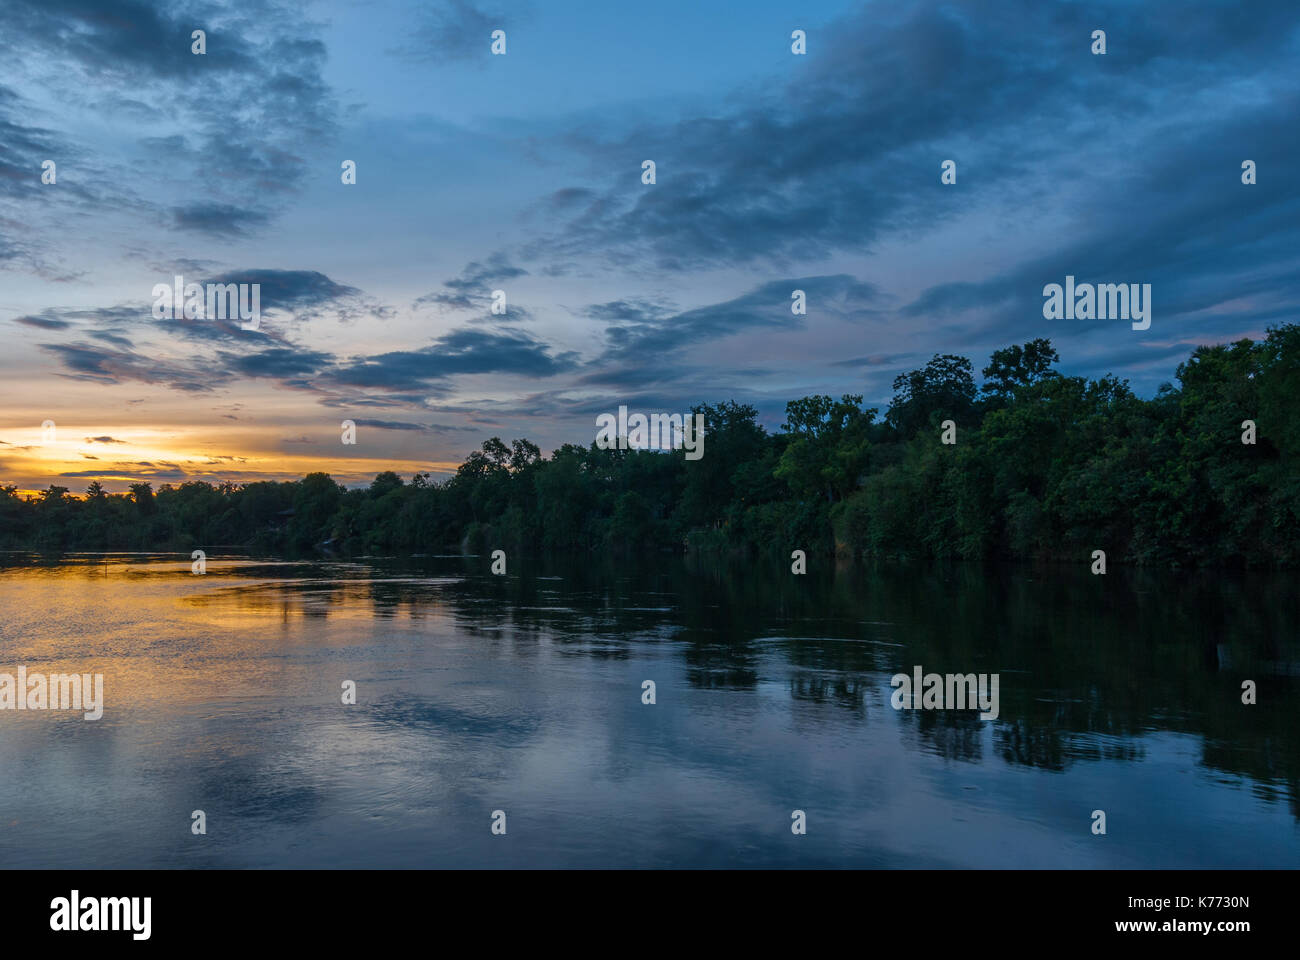 Sunset along the banks of the Amazon river.The tributaries of the Amazon traverse the countries of Guyana, Ecuador, Peru, Brazil, Colombia, Venezuela. Stock Photo